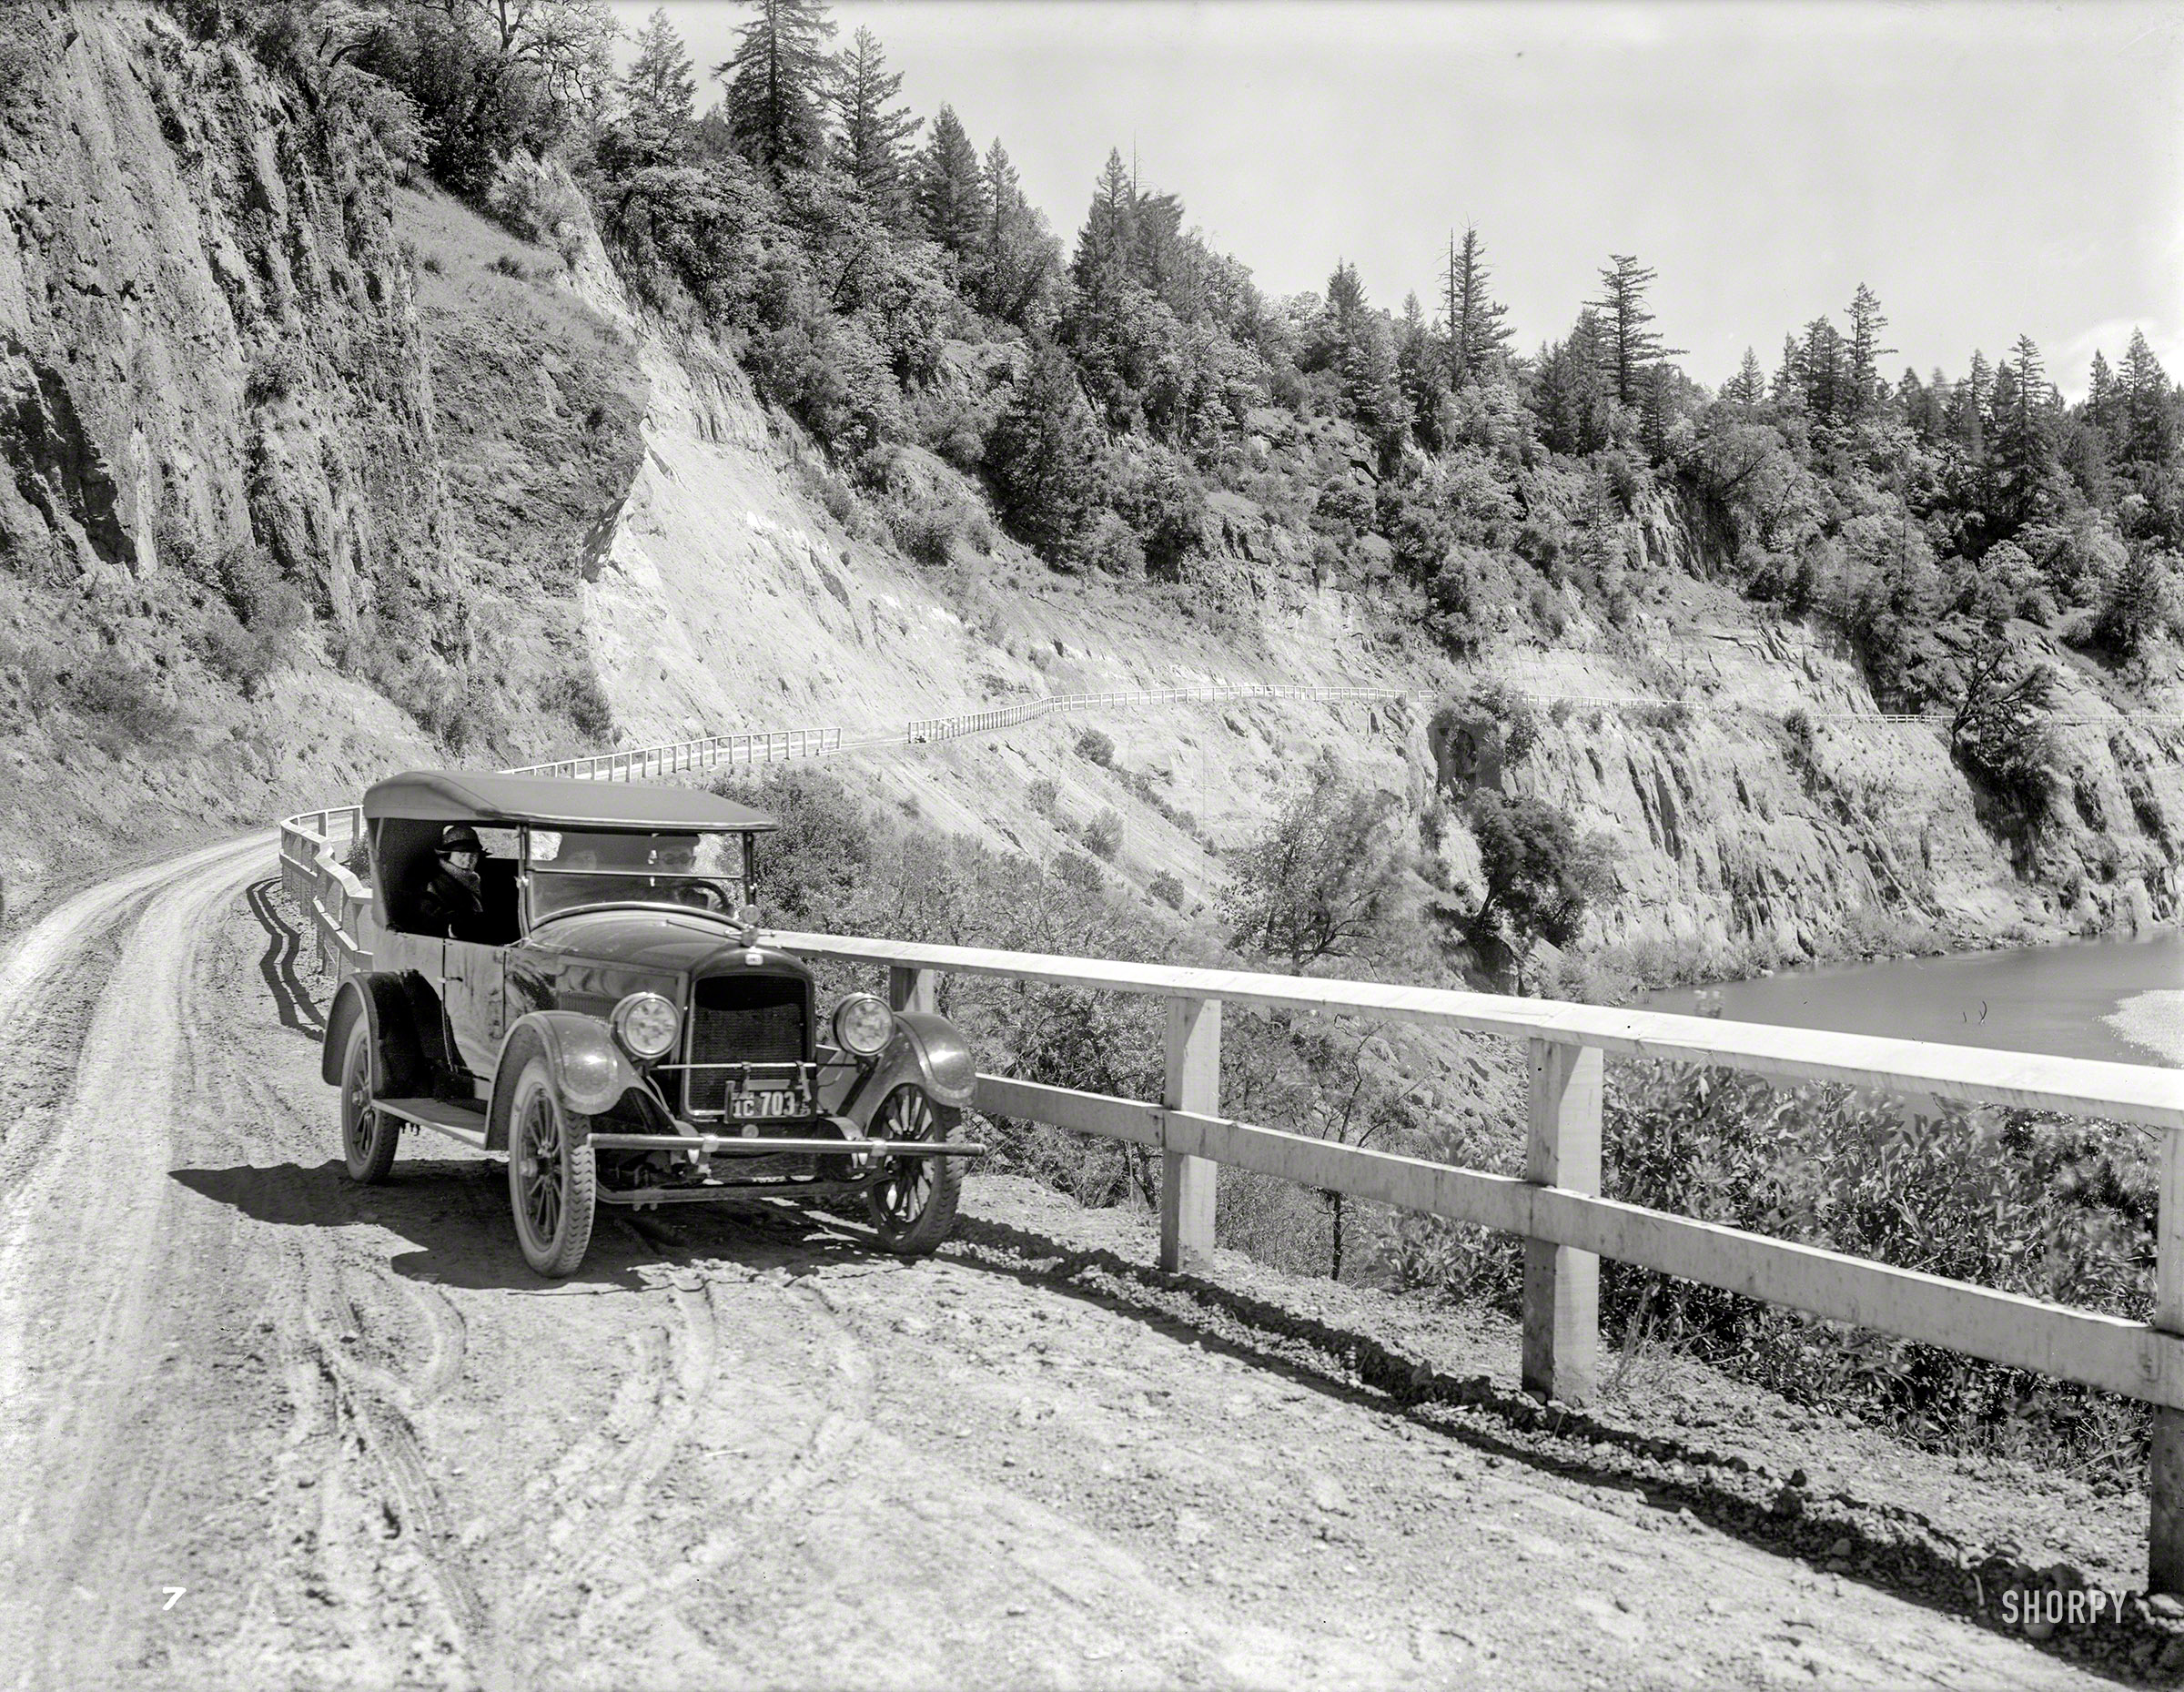 The Bay Area in 1923. "Plate 7. Jewett touring car on mountain road." 6½ x 8½ inch glass negative, originally from the Wyland Stanley collection. View full size.